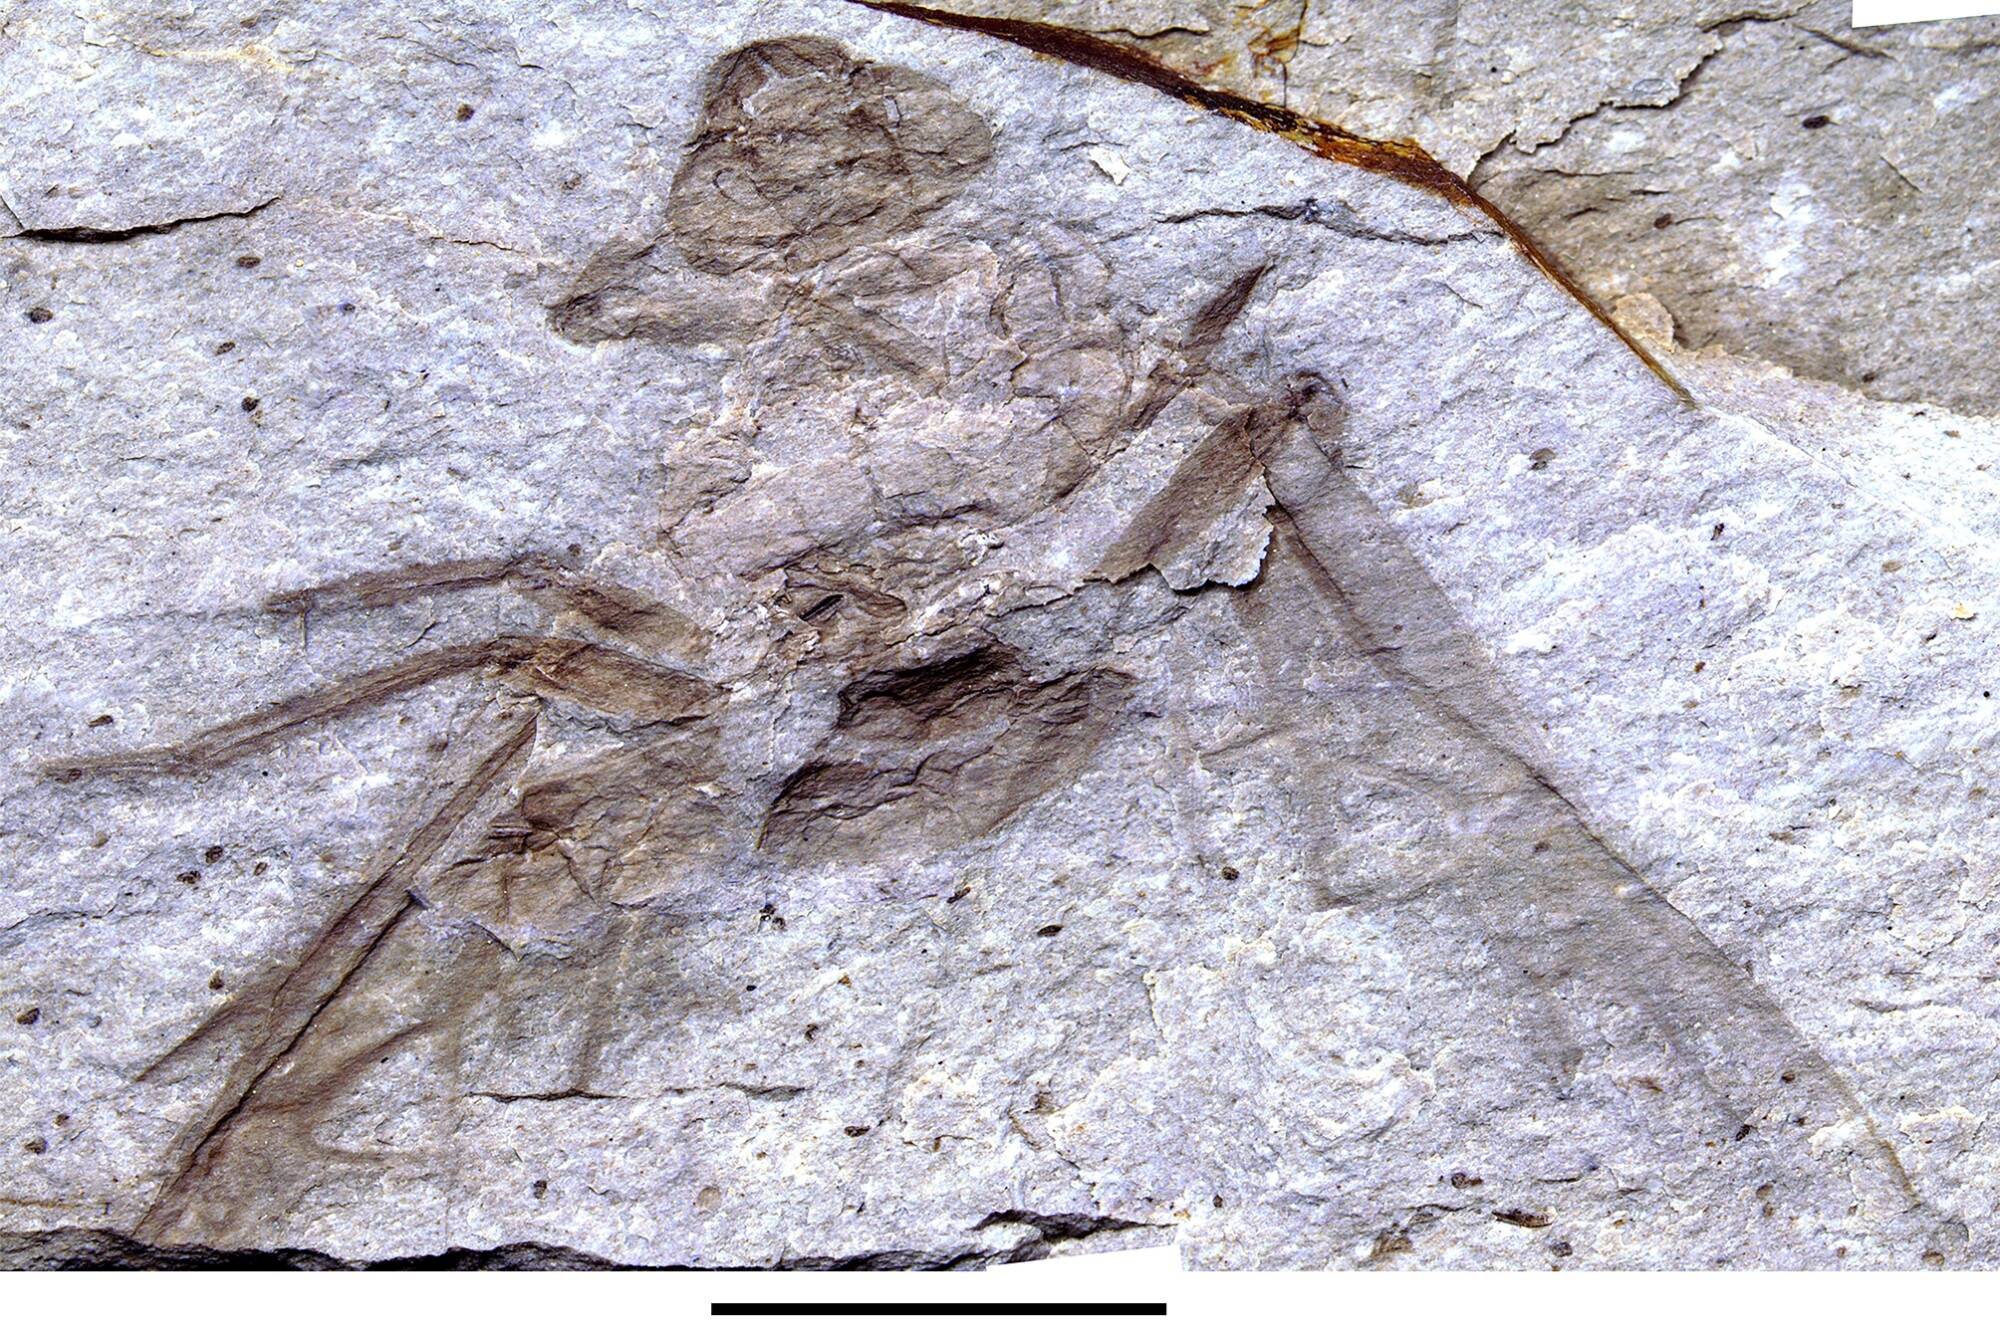 The fossil was discovered by Princeton resident Beverly Burlingame. (Bruce Archibald photo)